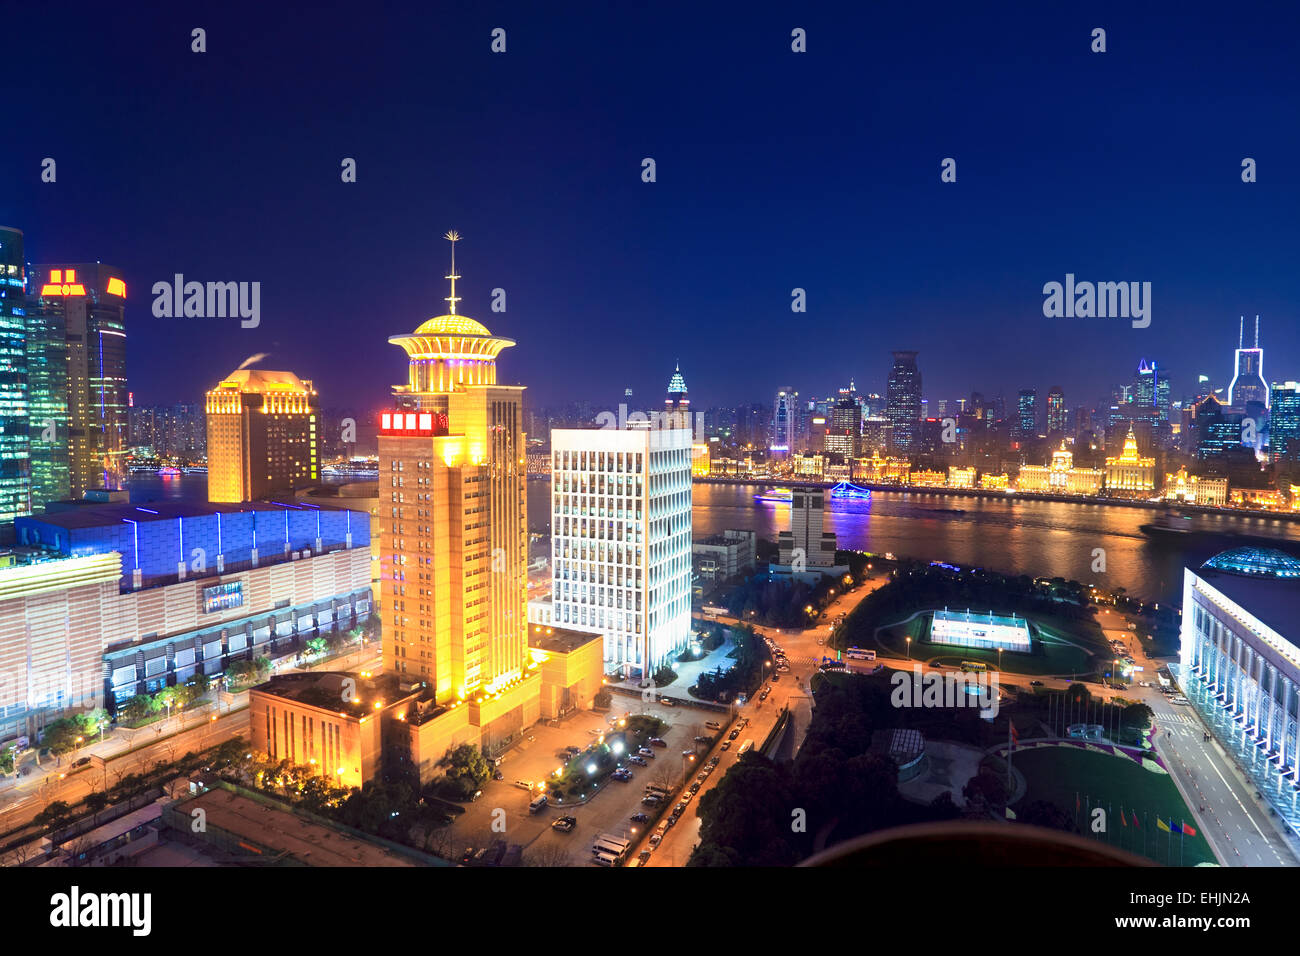 night scene of shanghai from the oriental pearl tv tower Stock Photo